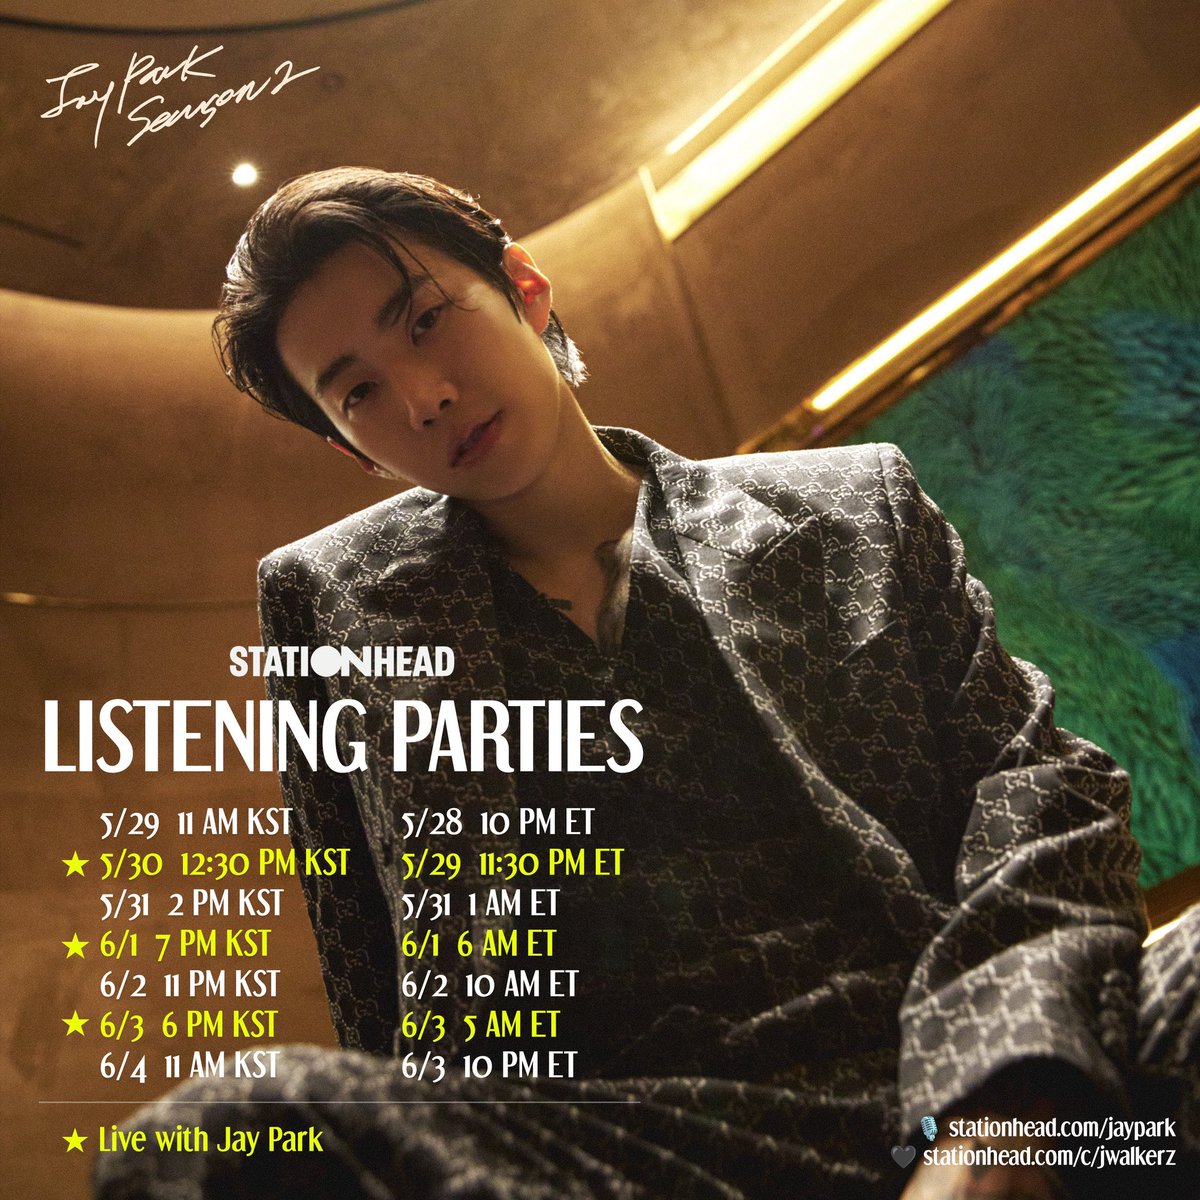 #JayPark_Season2 Stationhead Listening Party Schedule 🔴 LIVE WITH Jay Park 🗓️ 5/30 12:30PM KST 🗓️ 6/1 7PM KST 🗓️ 6/3 6PM KST 🎙️ stationhead.com/jaypark 🖤 stationhead.com/c/jwalkerz * @stationhead log-in & Connect to Spotify or Apple Music account required @JAYBUMAOM #박재범